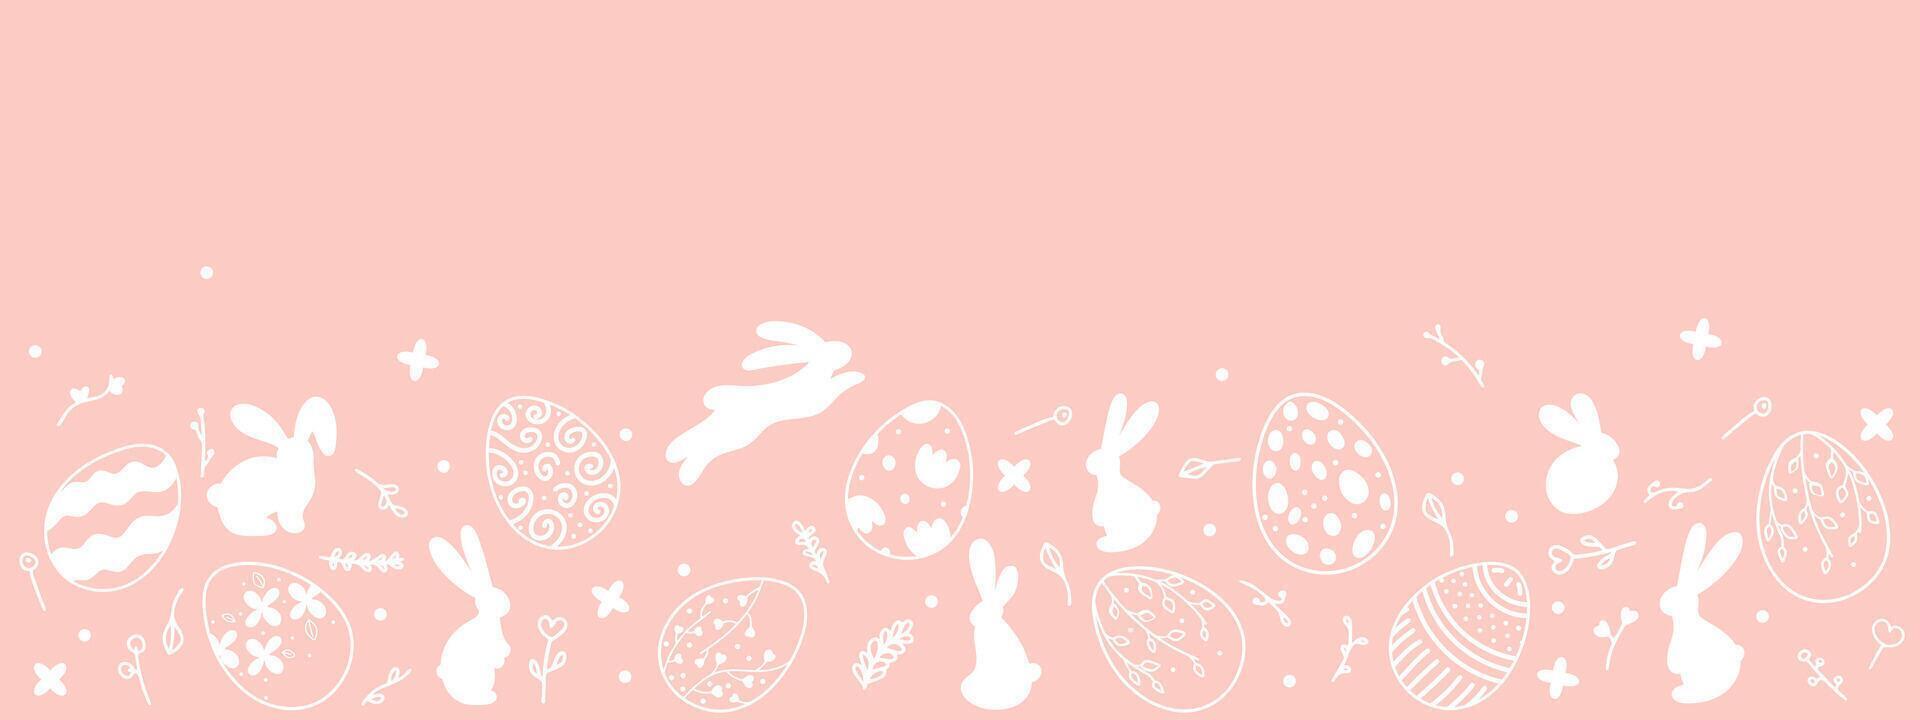 Pink banner for Easter decoration. Silhouettes of Easter bunnies and eggs in vintage style with floral elements. Unique design for the decoration of Easter goods and web use. vector